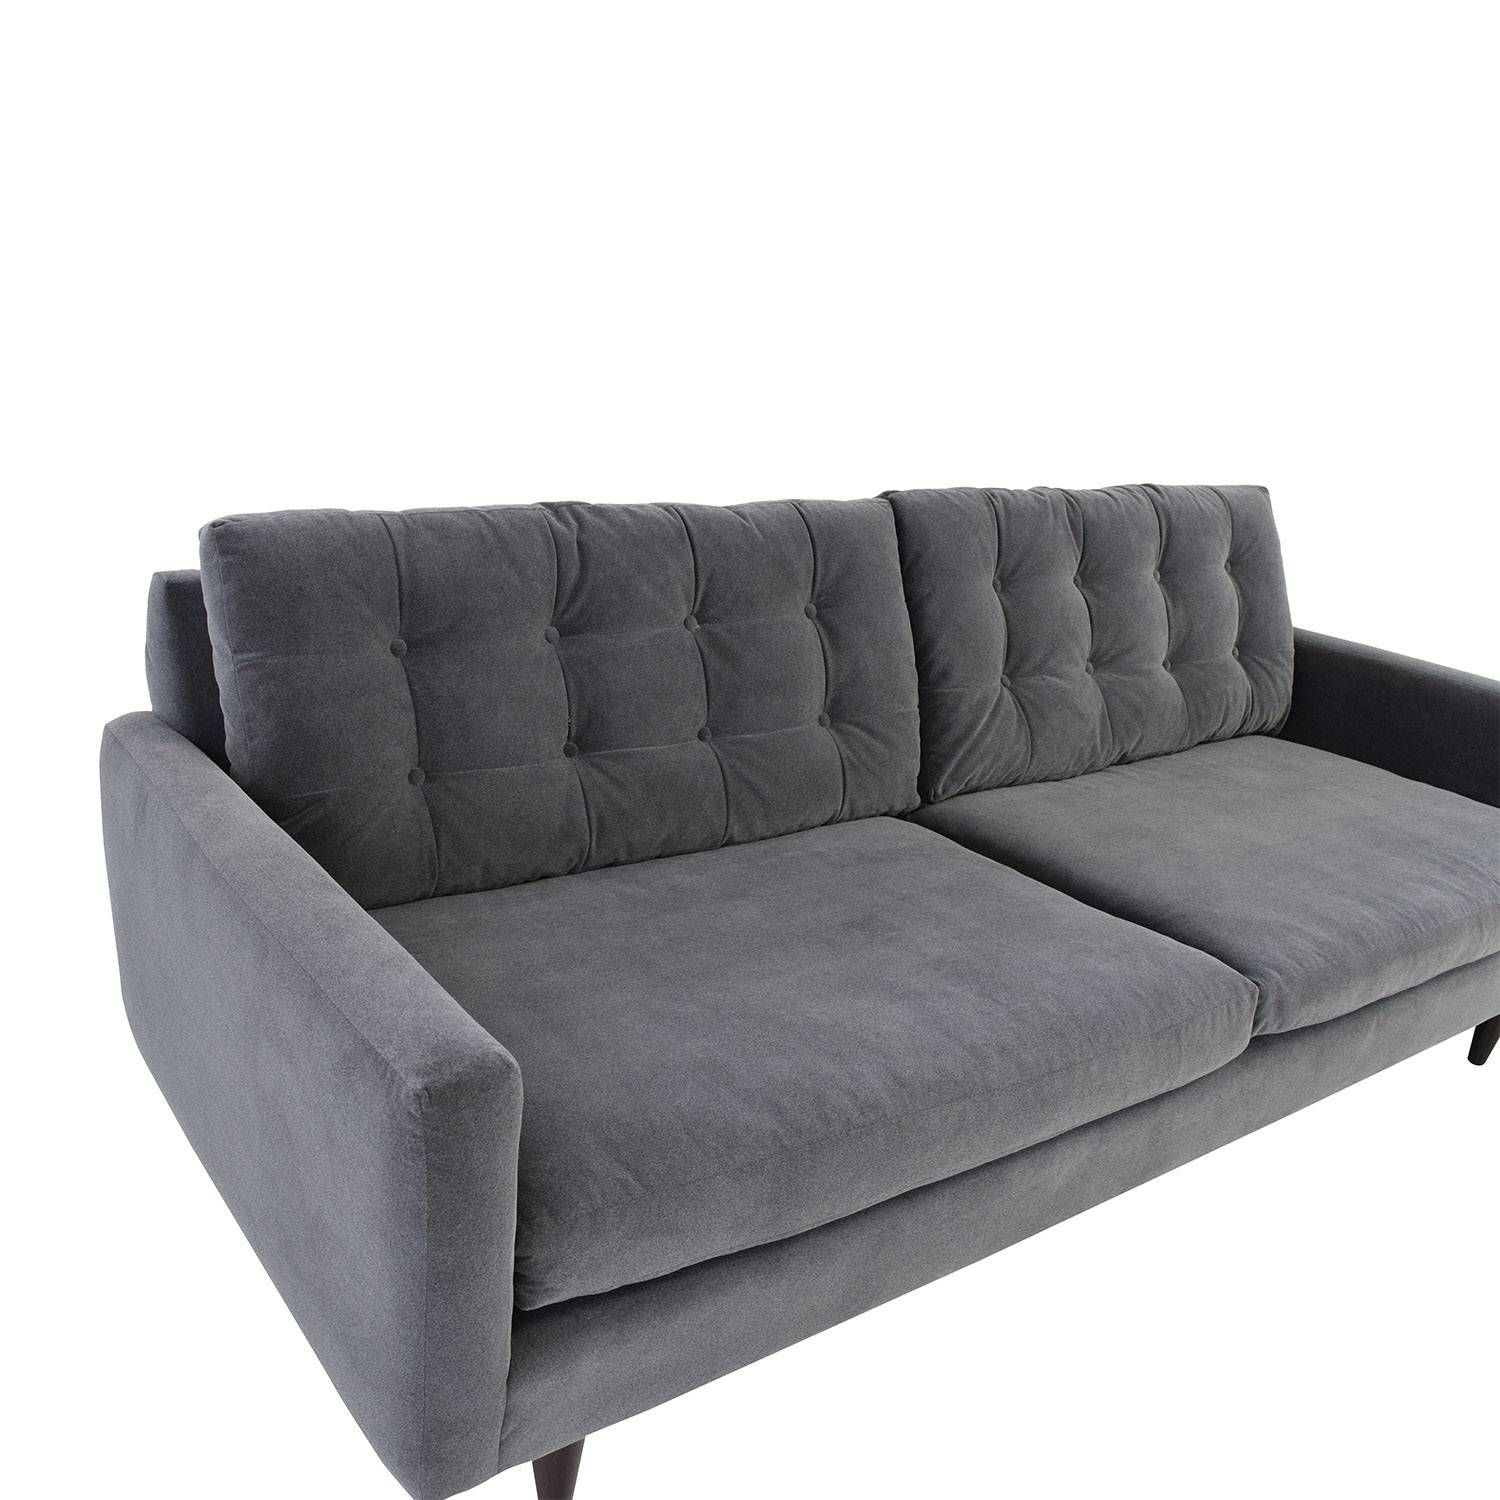 62% Off – Crate And Barrel Crate & Barrel Petrie Mid Century Grey For Crate And Barrel Futon Sofas (View 11 of 15)